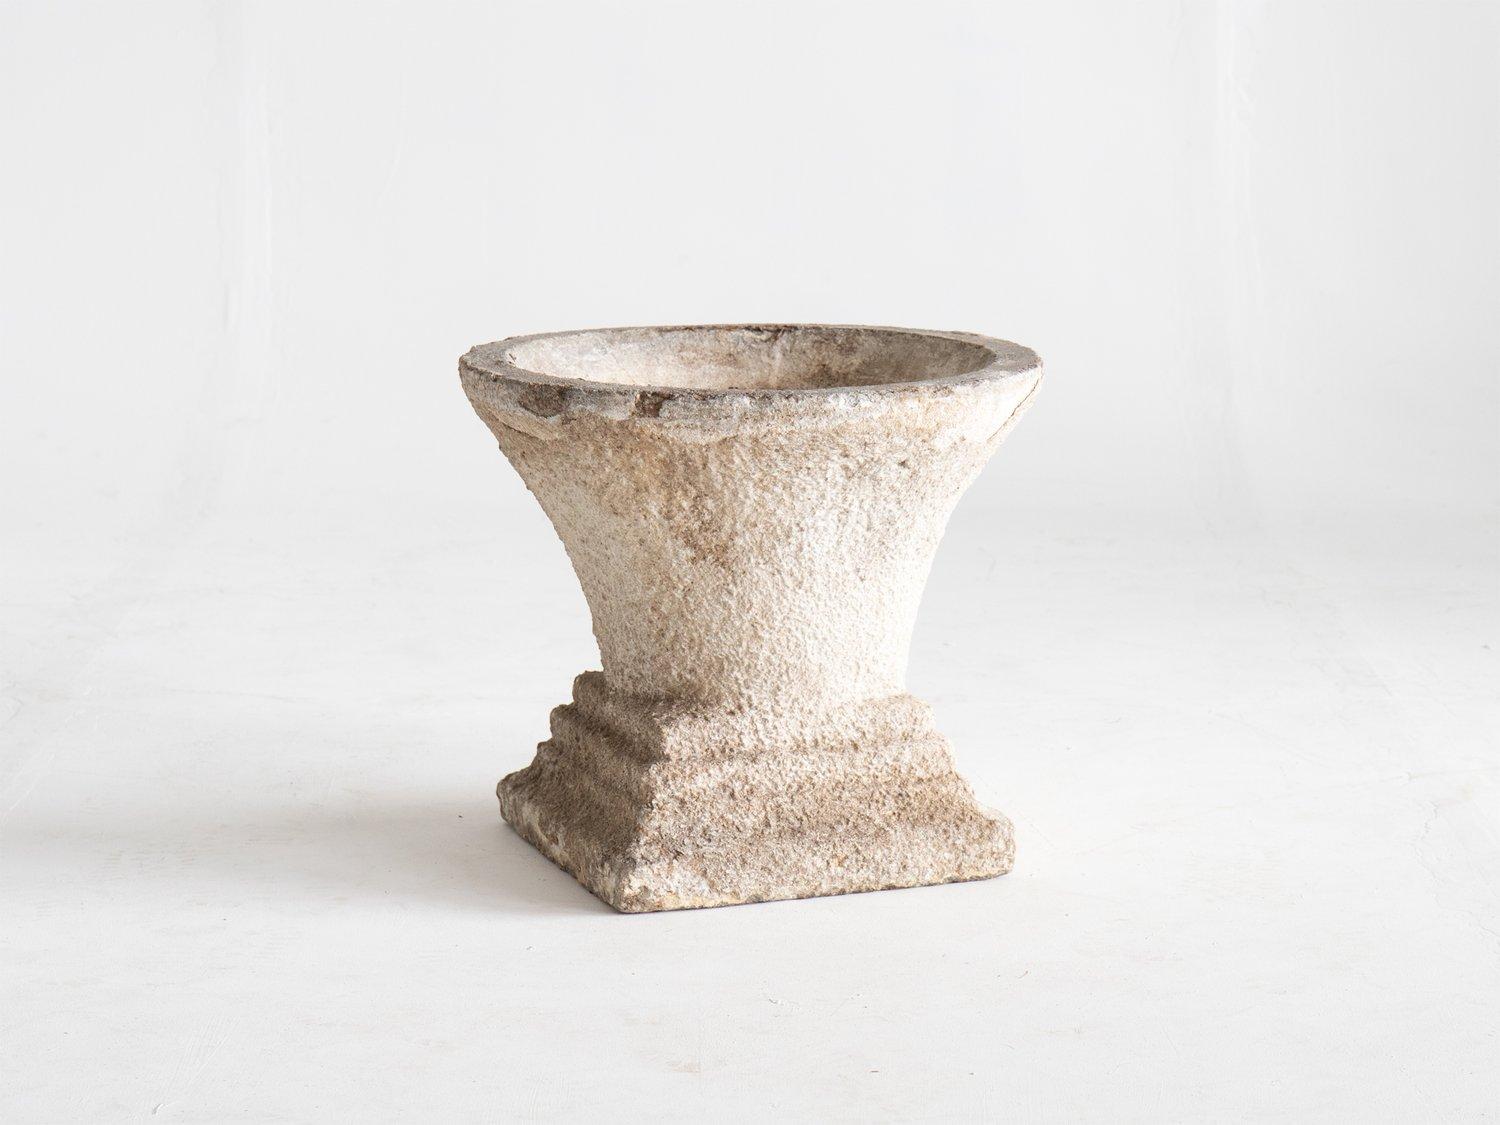 French Midcentury Brutalist Cast Concrete Garden House Planter with Weathered Patina For Sale